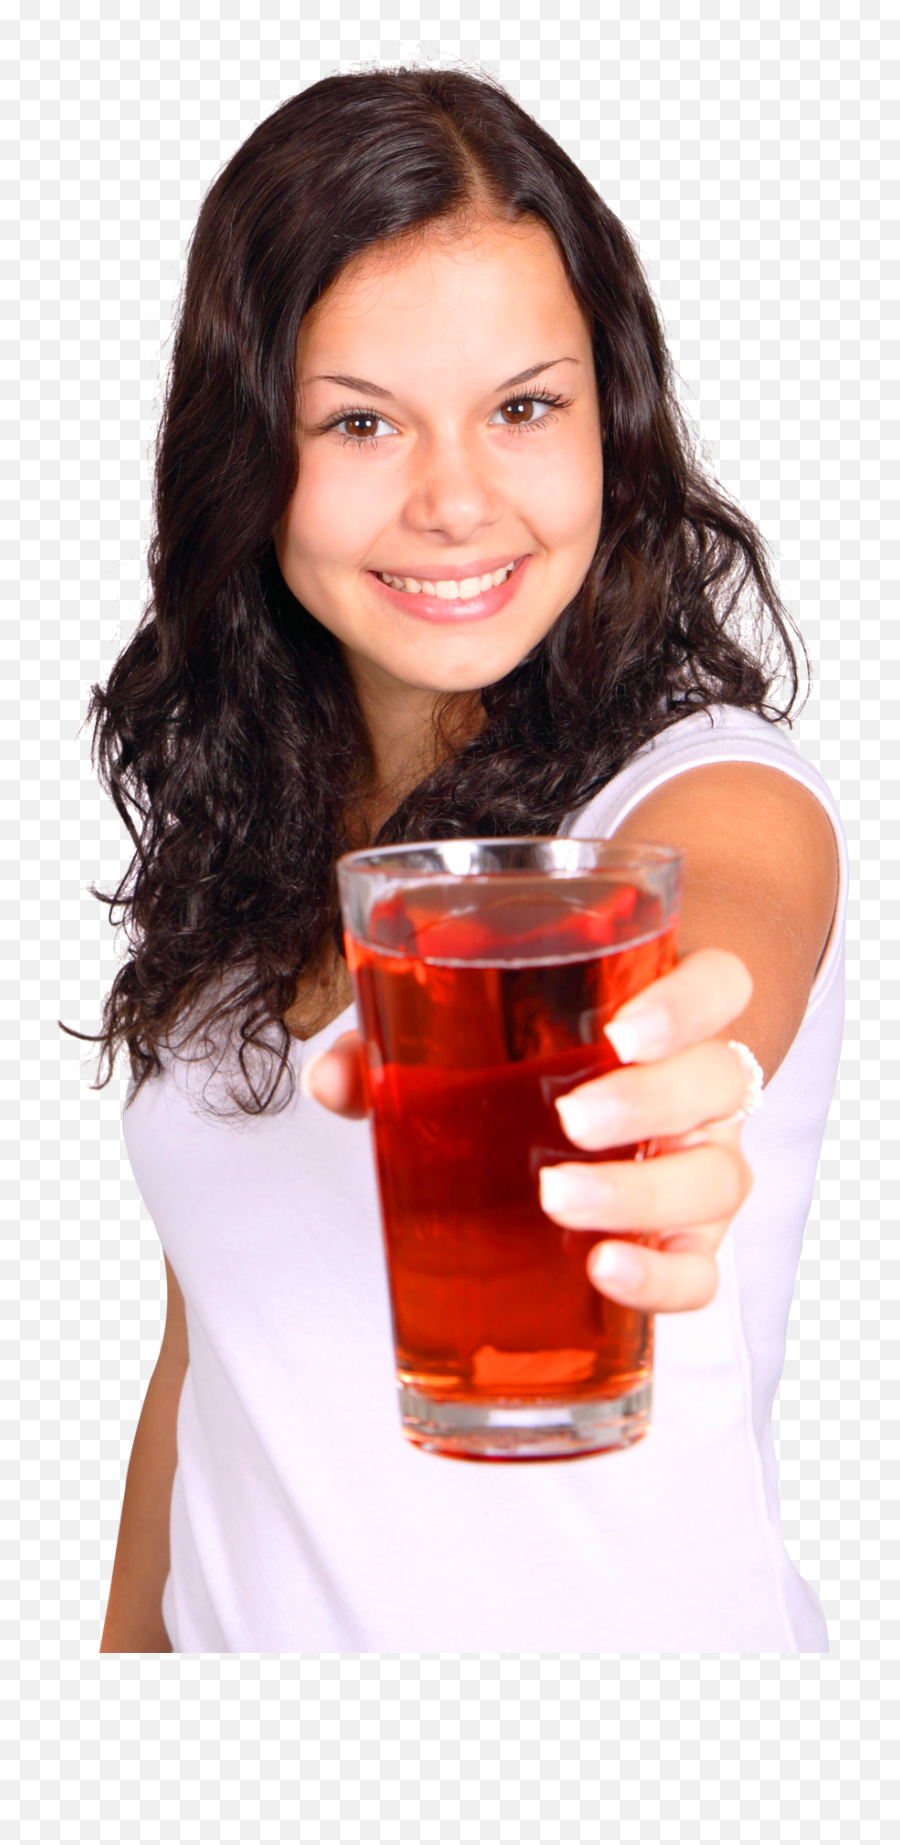 Young Girl With Glass Of Fresh Juice Png Image - Pngpix Juice Png Glass,Juice Png